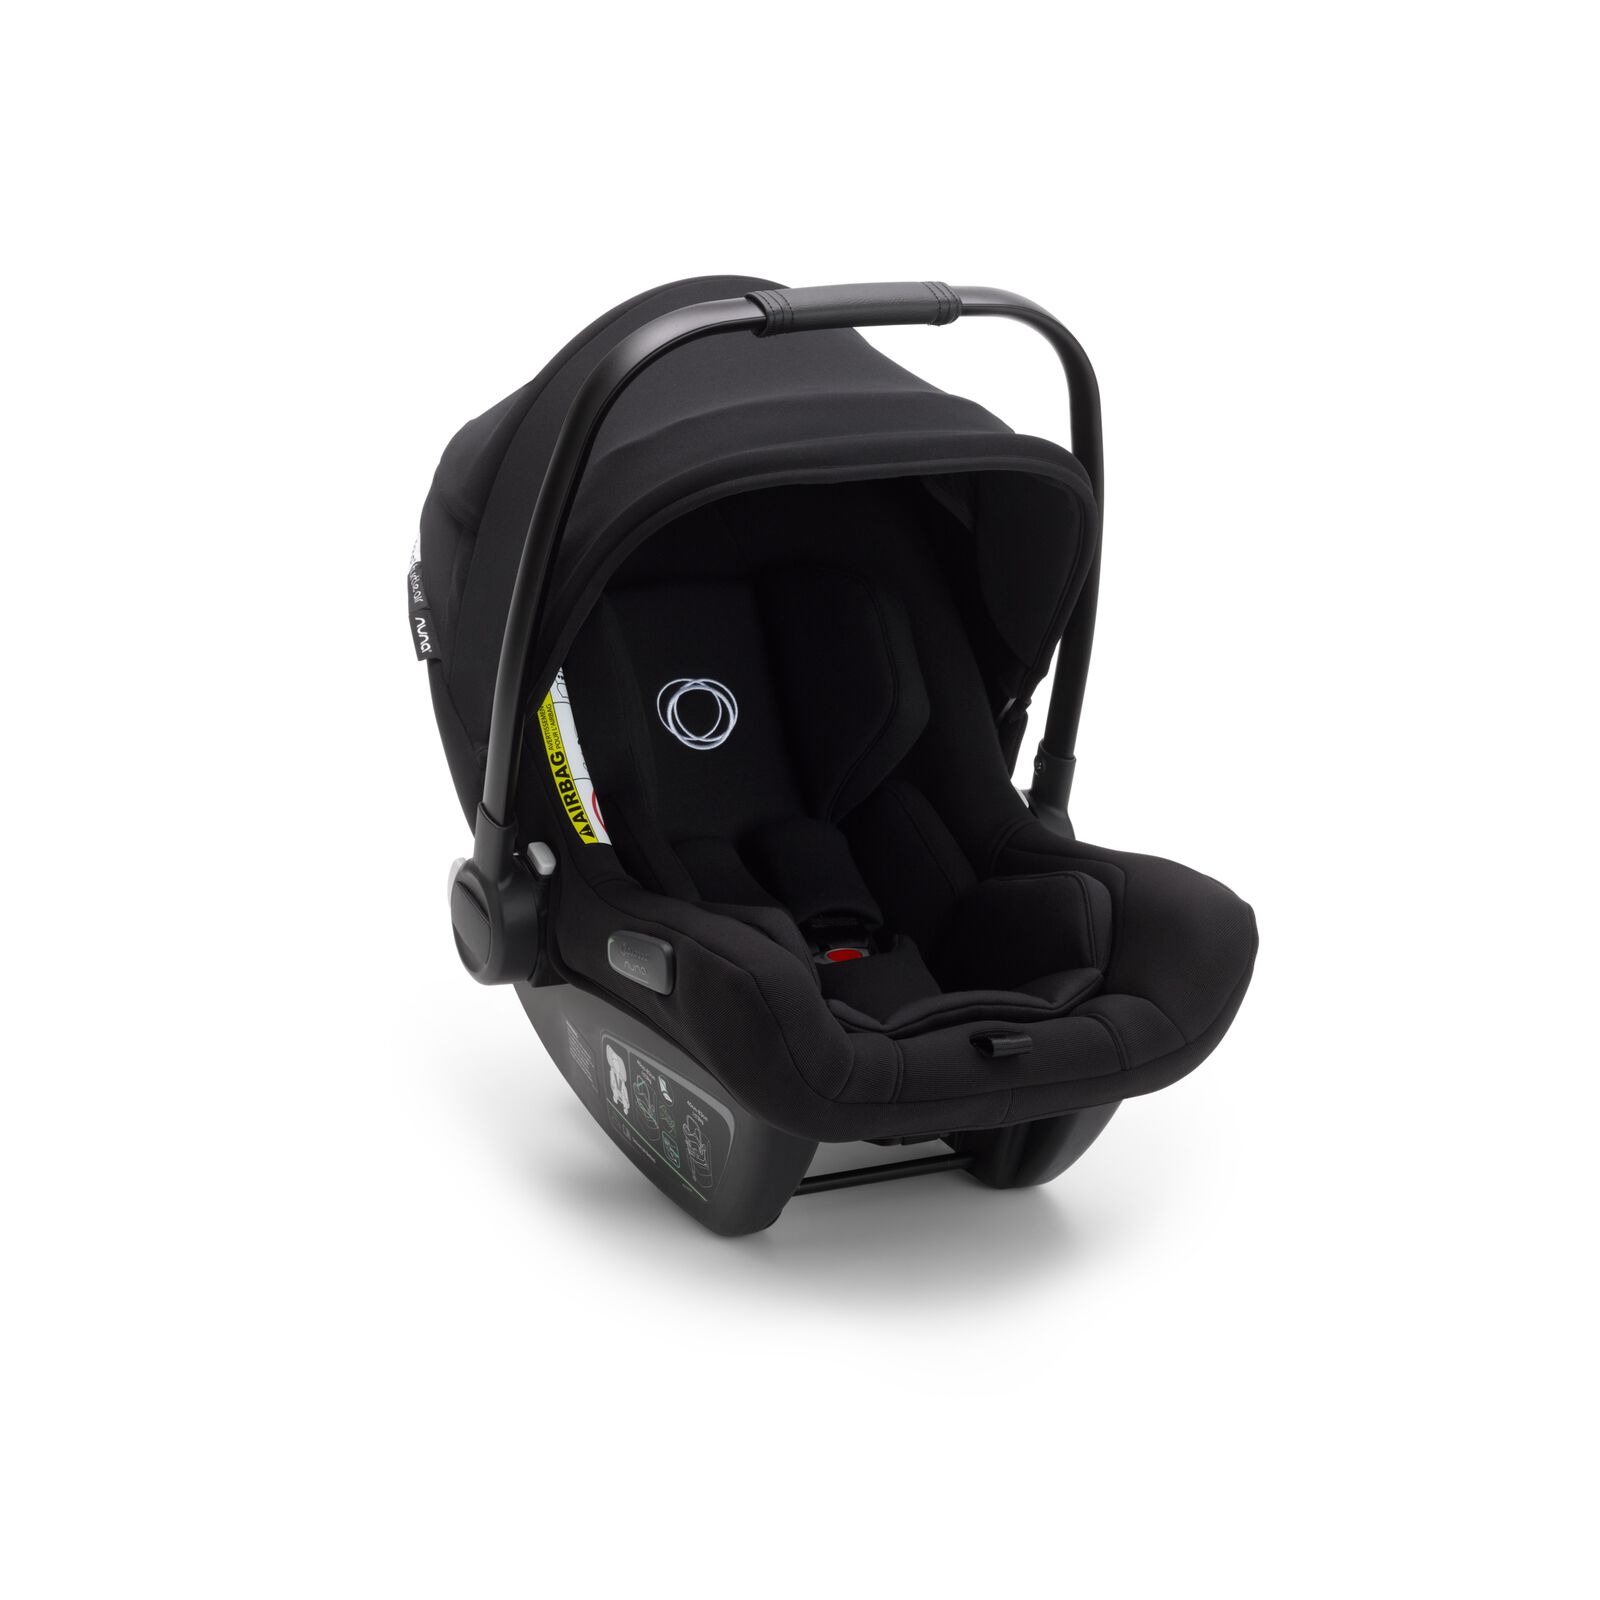 Bugaboo Donkey 3 Twin travel system - View 2